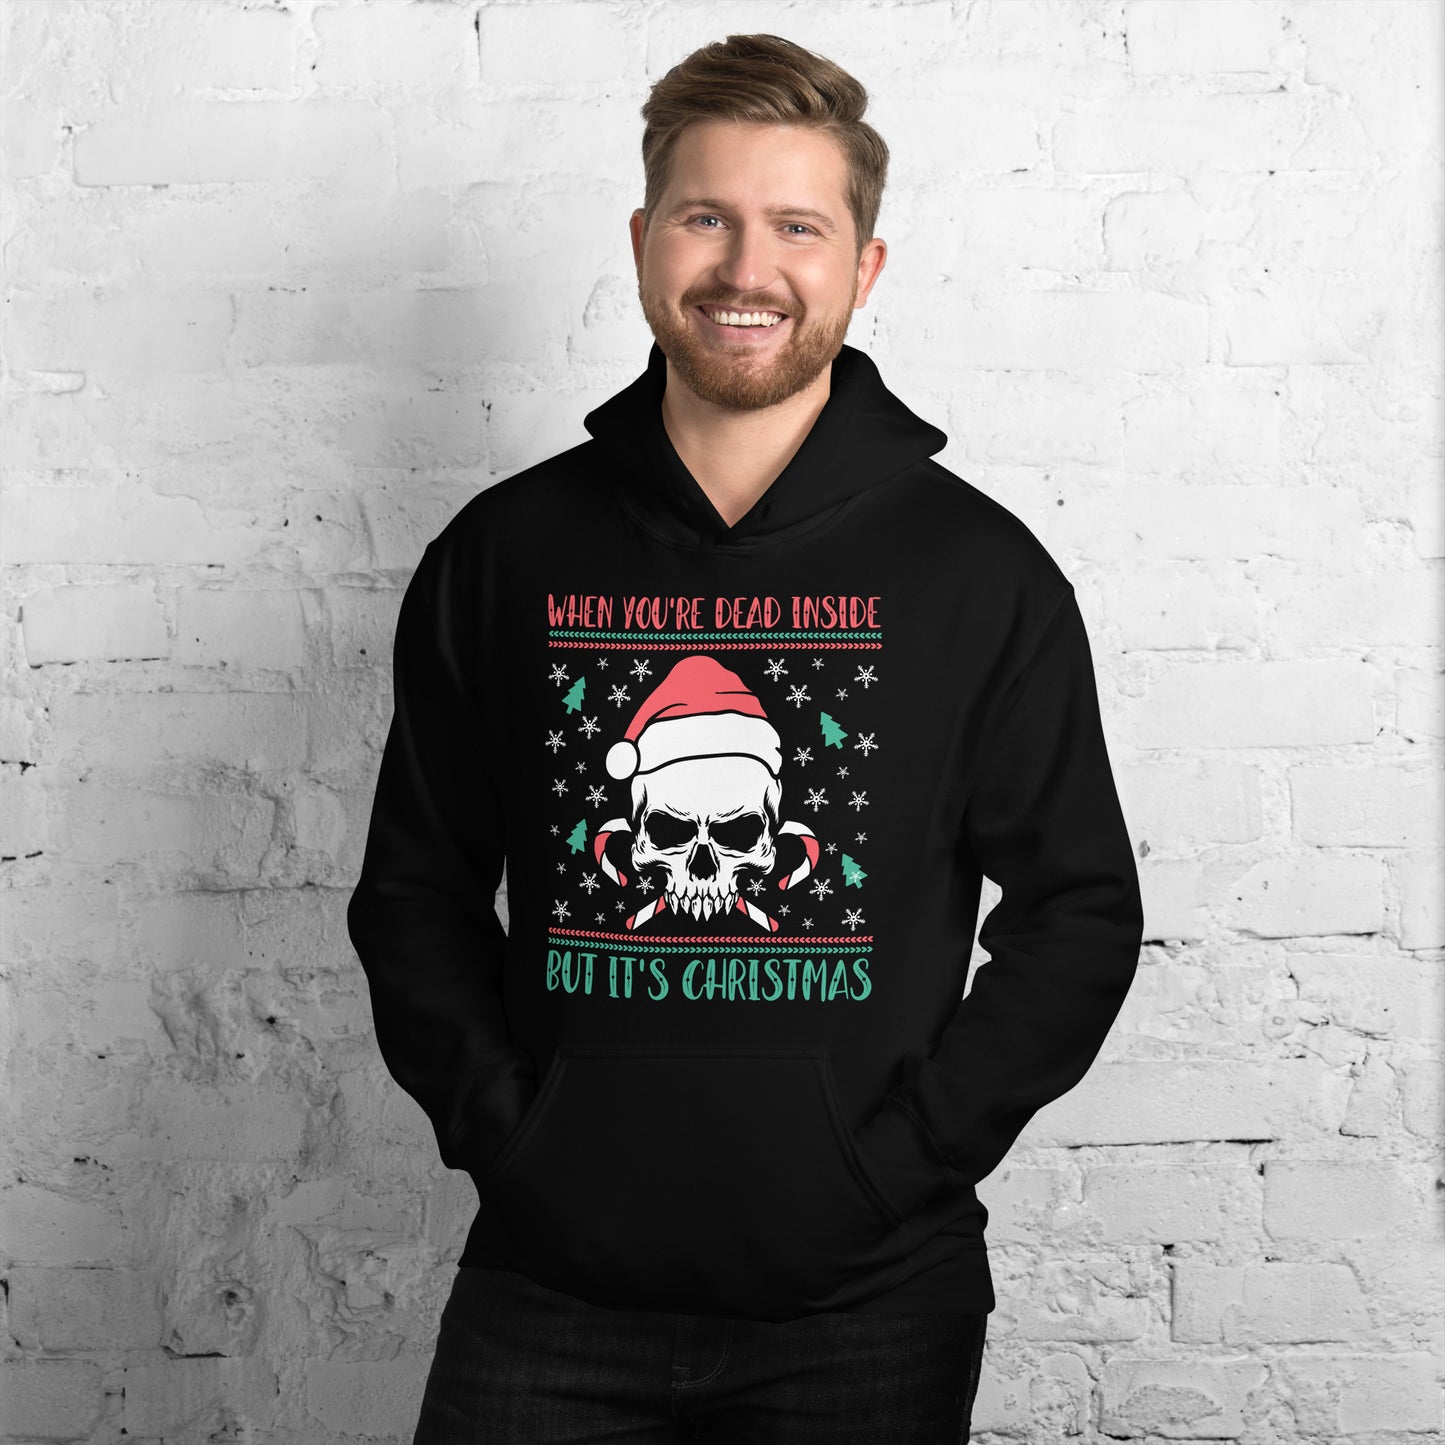 When You're Dead Inside But Its Christmas Hoodie on a man